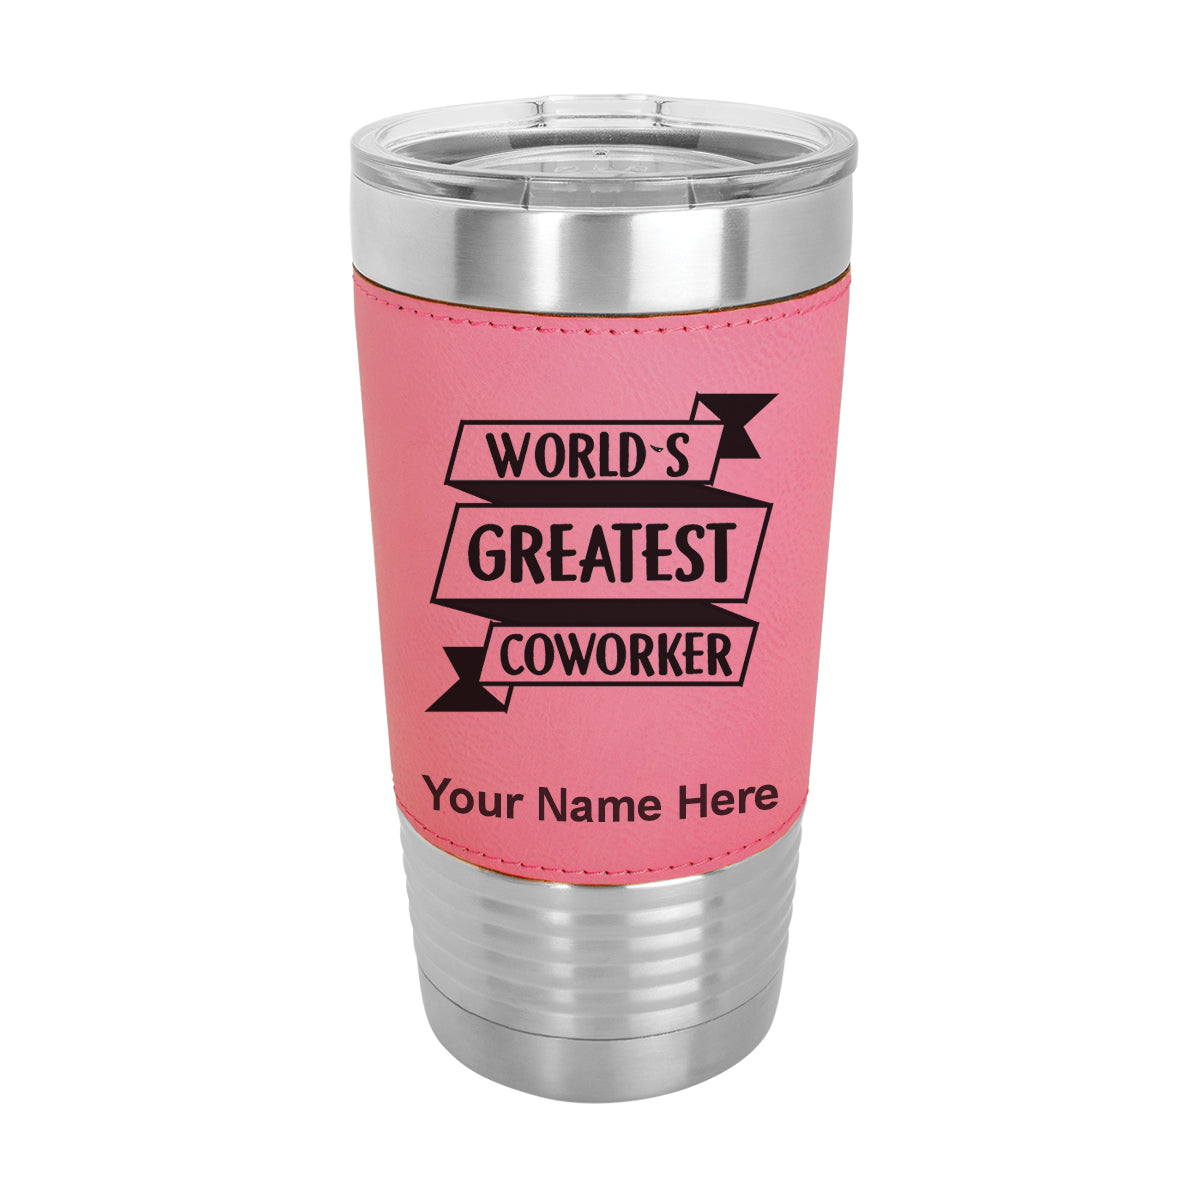 20oz Faux Leather Tumbler Mug, World's Greatest Coworker, Personalized Engraving Included